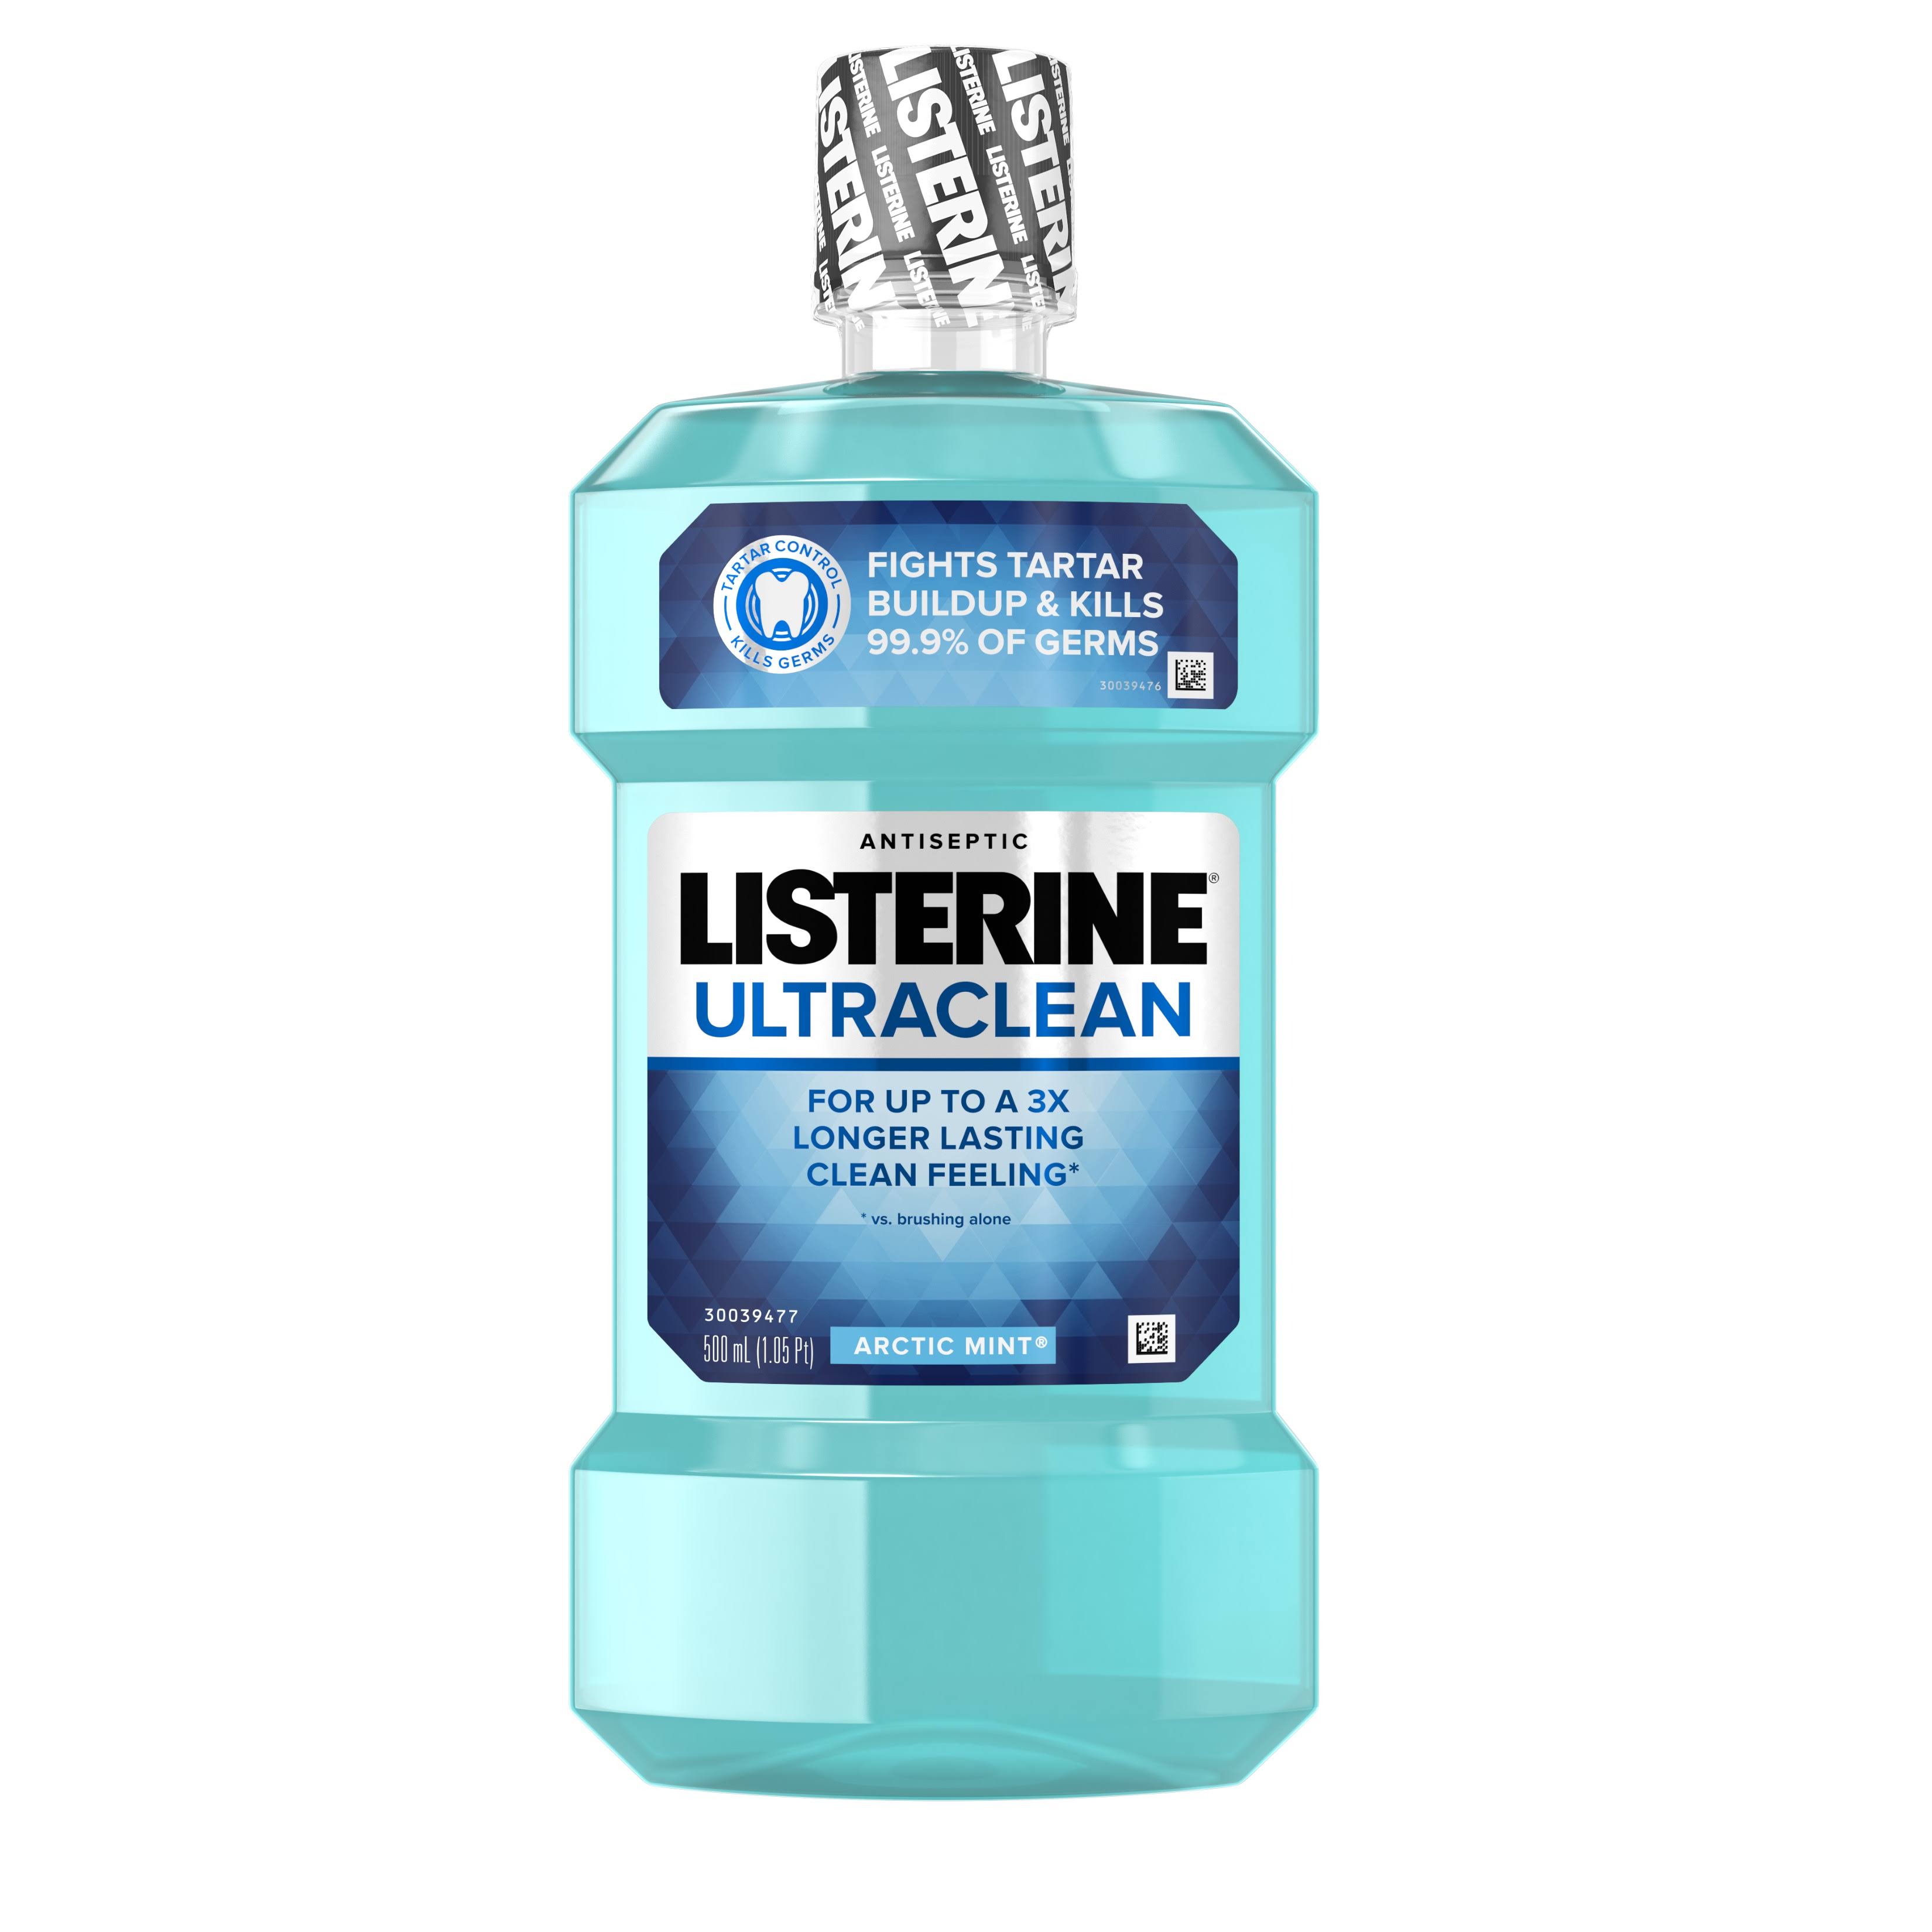 Listerine Ultra Clean Antiseptic Mouthwash - Arctic Mint, 500ml